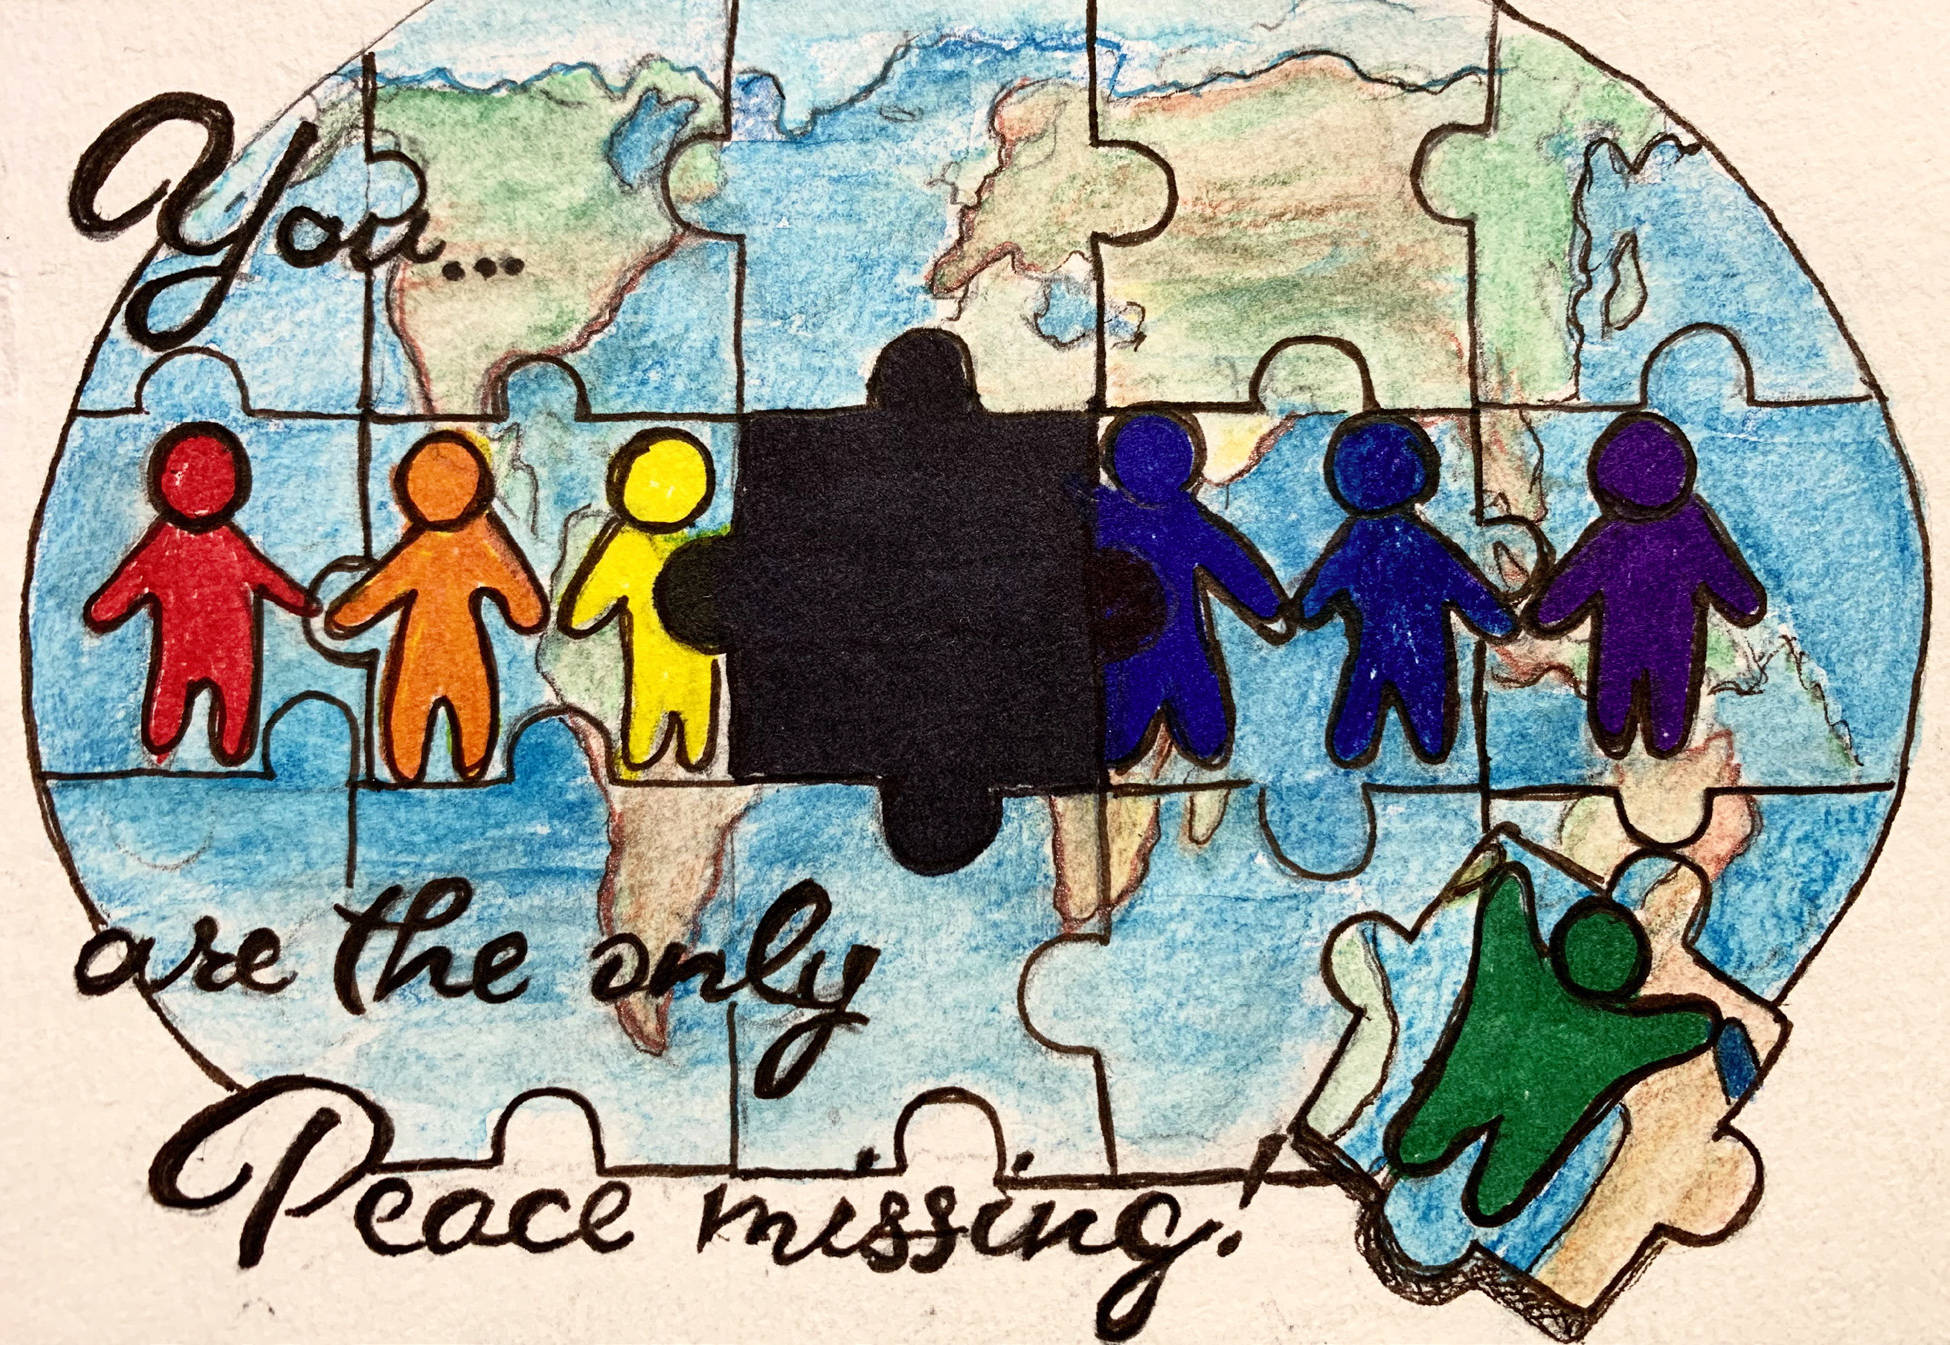 RJ Nelson’s work of art is part of the Choir for Peace show on display before the May 2 and 3, 2019 concerts in the Homer High School Commons in Homer, Alaska. (Photo provided)